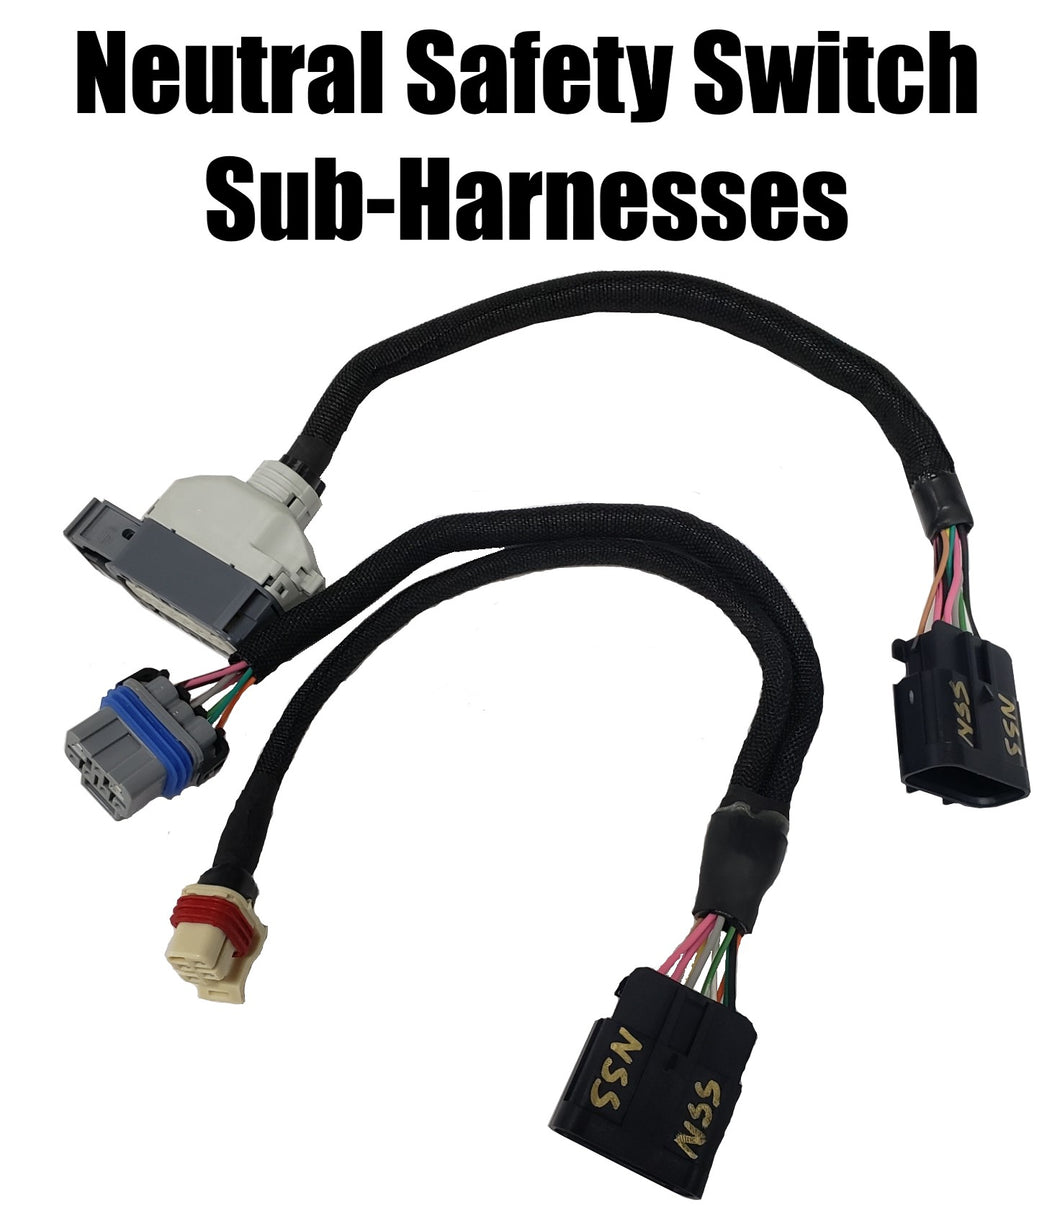 (SMI-IH2-GMT800) Fully Integrated Holley EFI Harness for 03-07 GMT800 Trucks and SUV's (Final Payment)